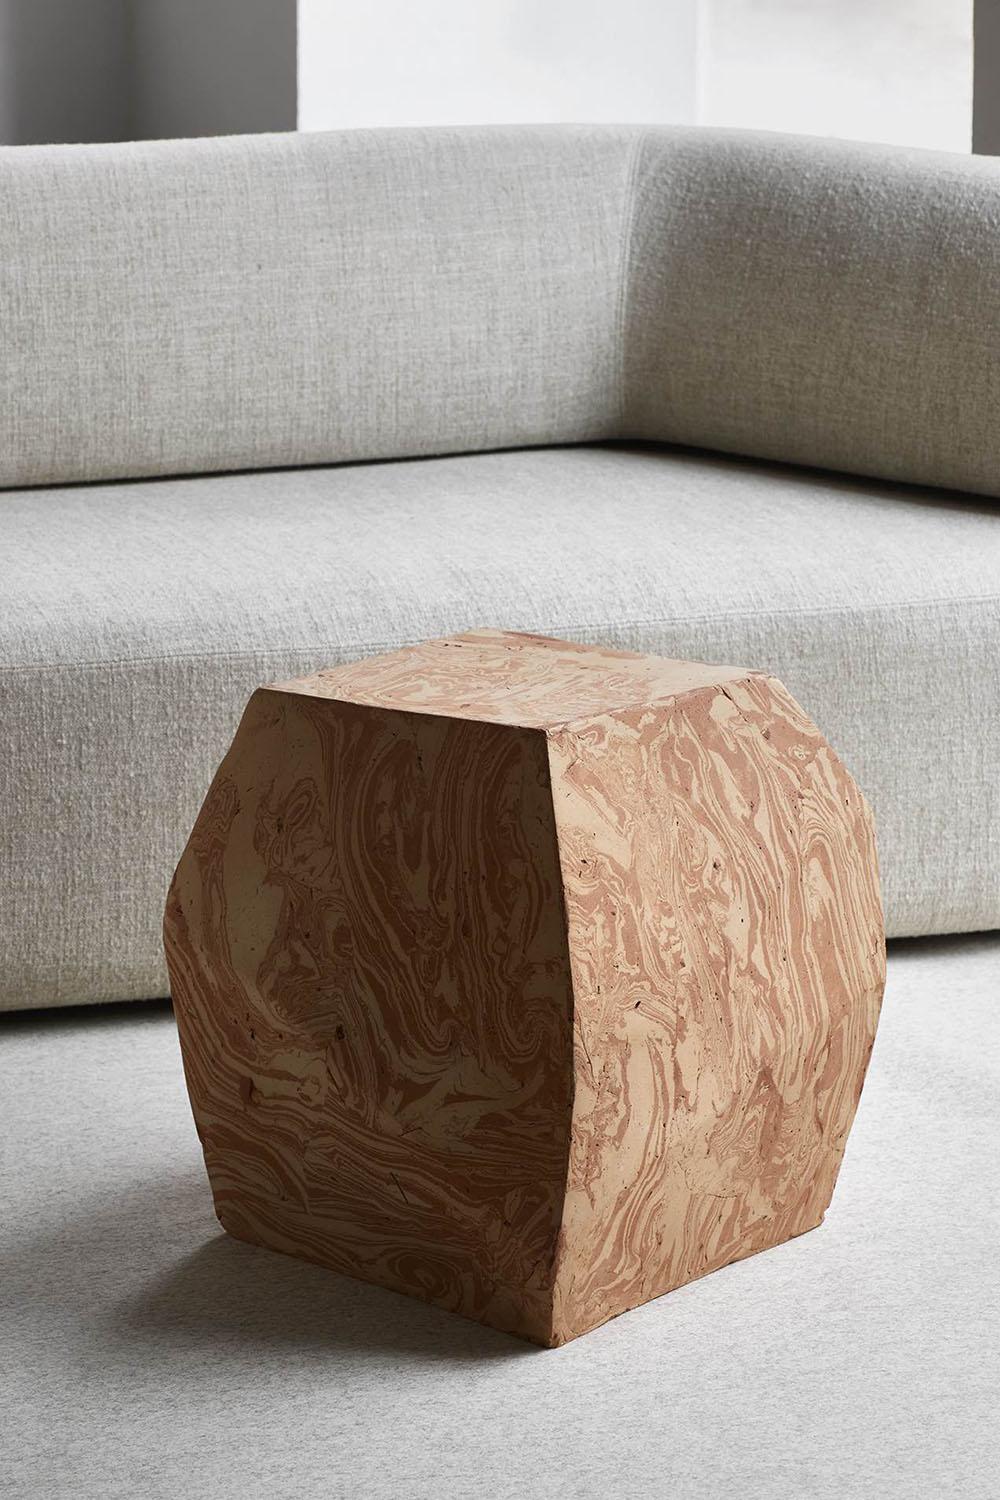 Terra is a side table with an unconventional design, by Luca Erba for the Collection Particuliere brand. 
Handmade in Italy with mixed clay.
Terra presents a raw geometric design, showing the solidity that the author has created. The meeting